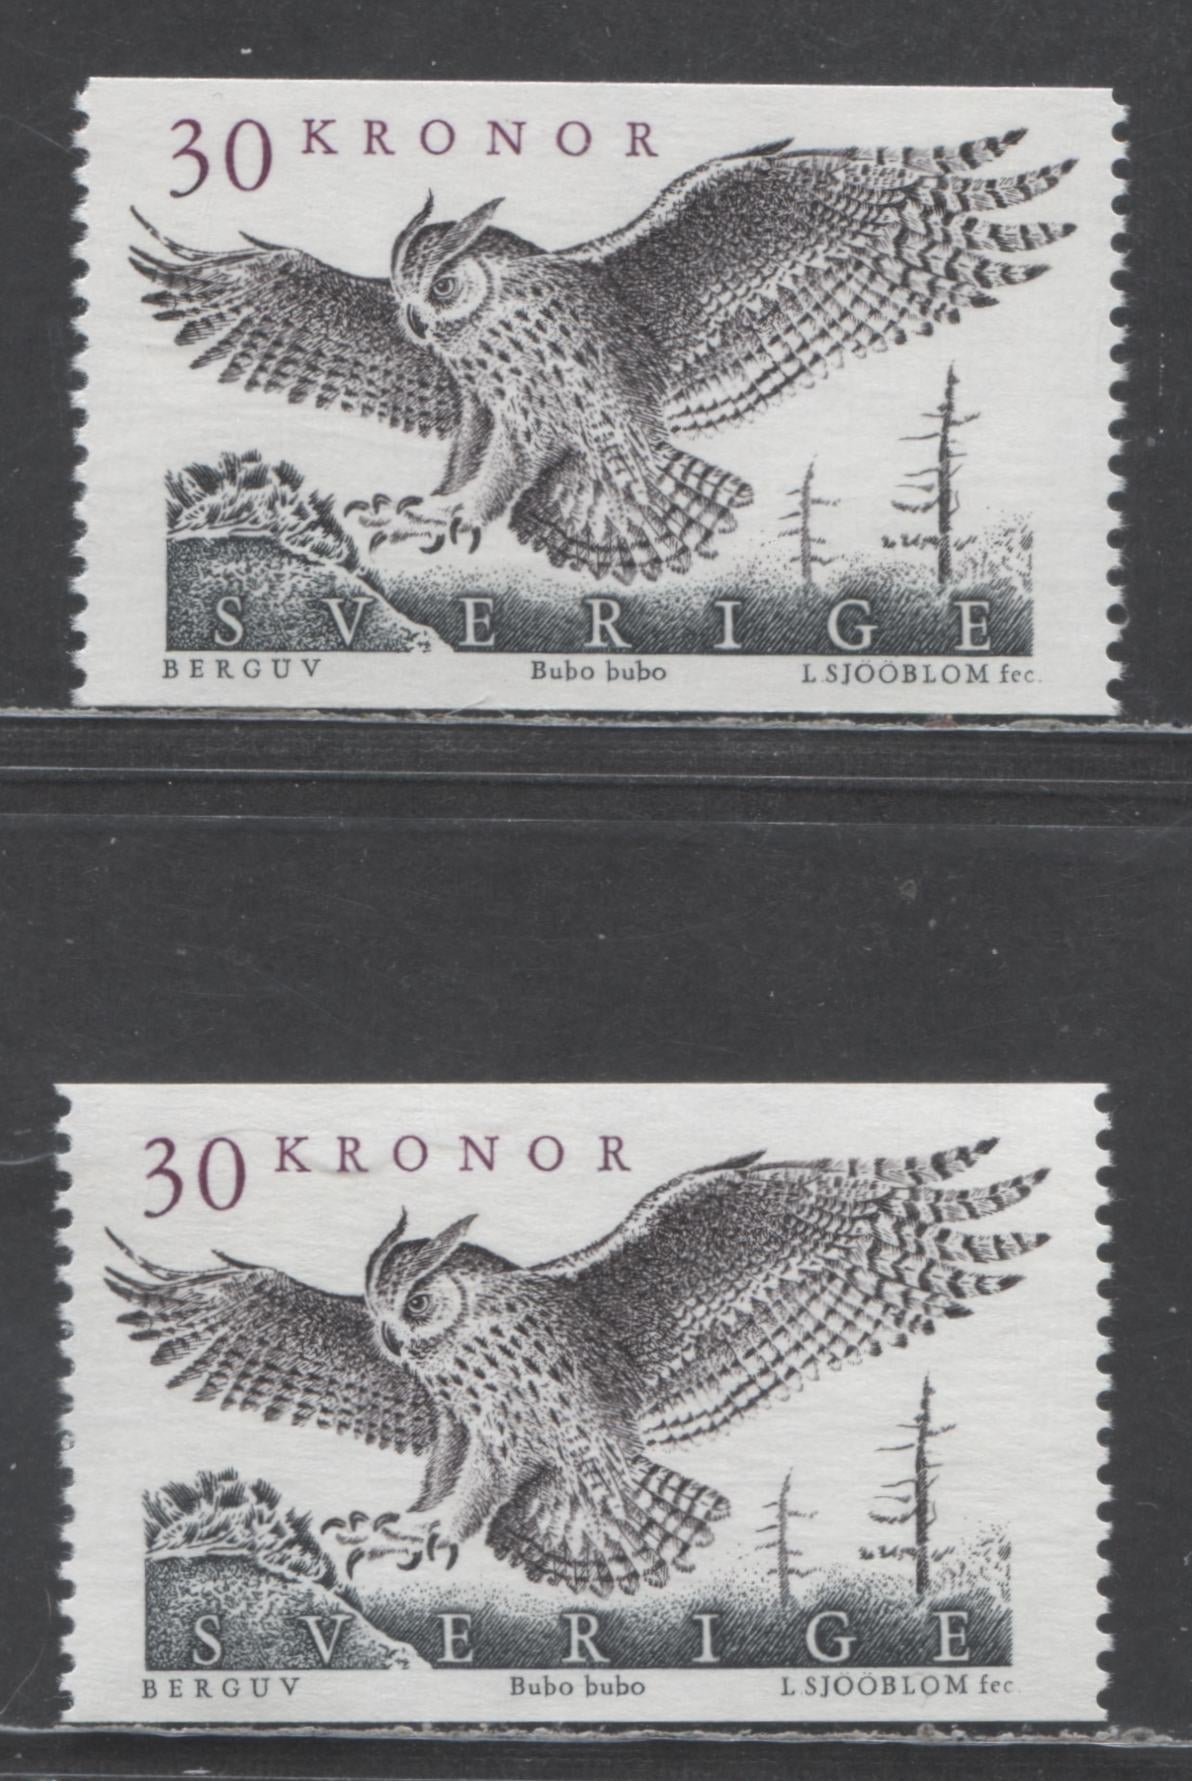 Lot 67 Sweden SC#1761 30Kr Multicoloured 1989 Eagle Owl High Value Definitive Issue, On NF and LF Papers, With Control Numbers On Back, 2 VFNH Singles, Click on Listing to See ALL Pictures, Estimated Value $40